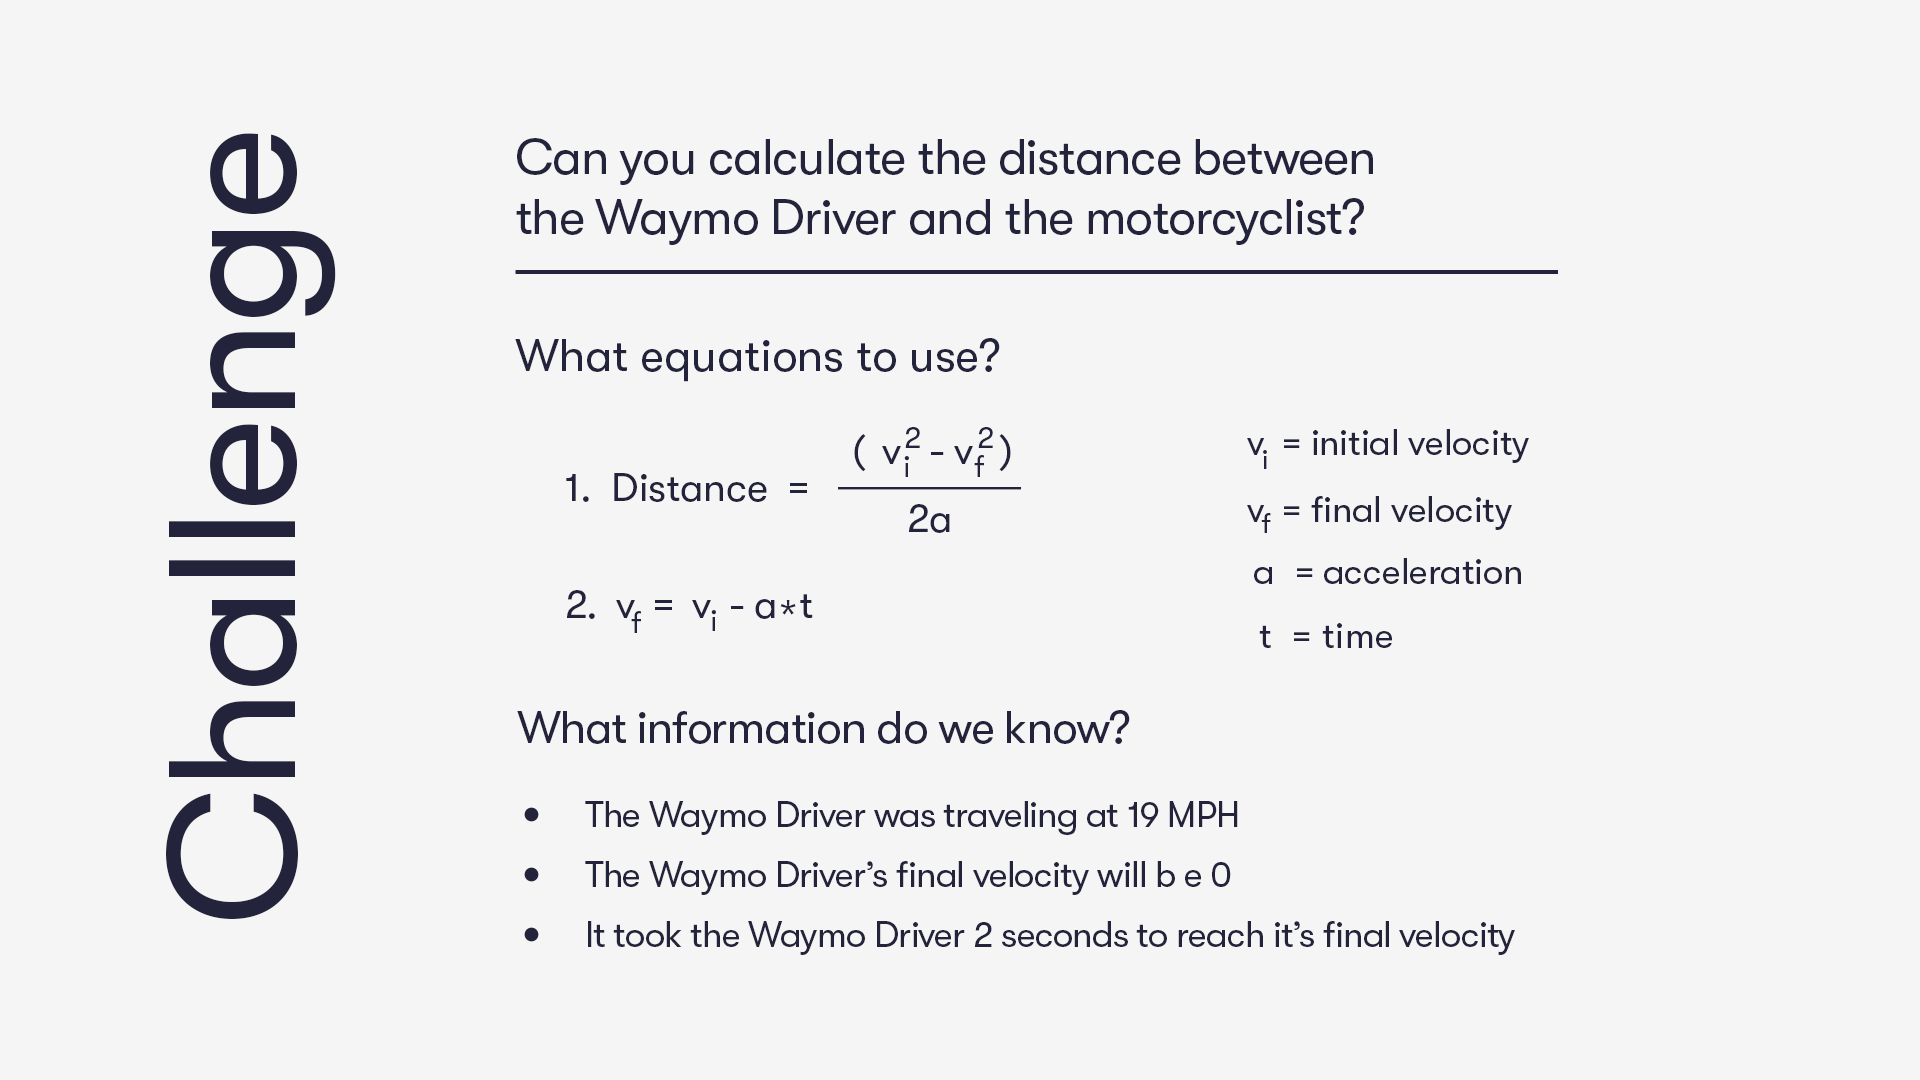 A hypothetical math equation calculating the distance between a Waymo vehicle and motorcyclist